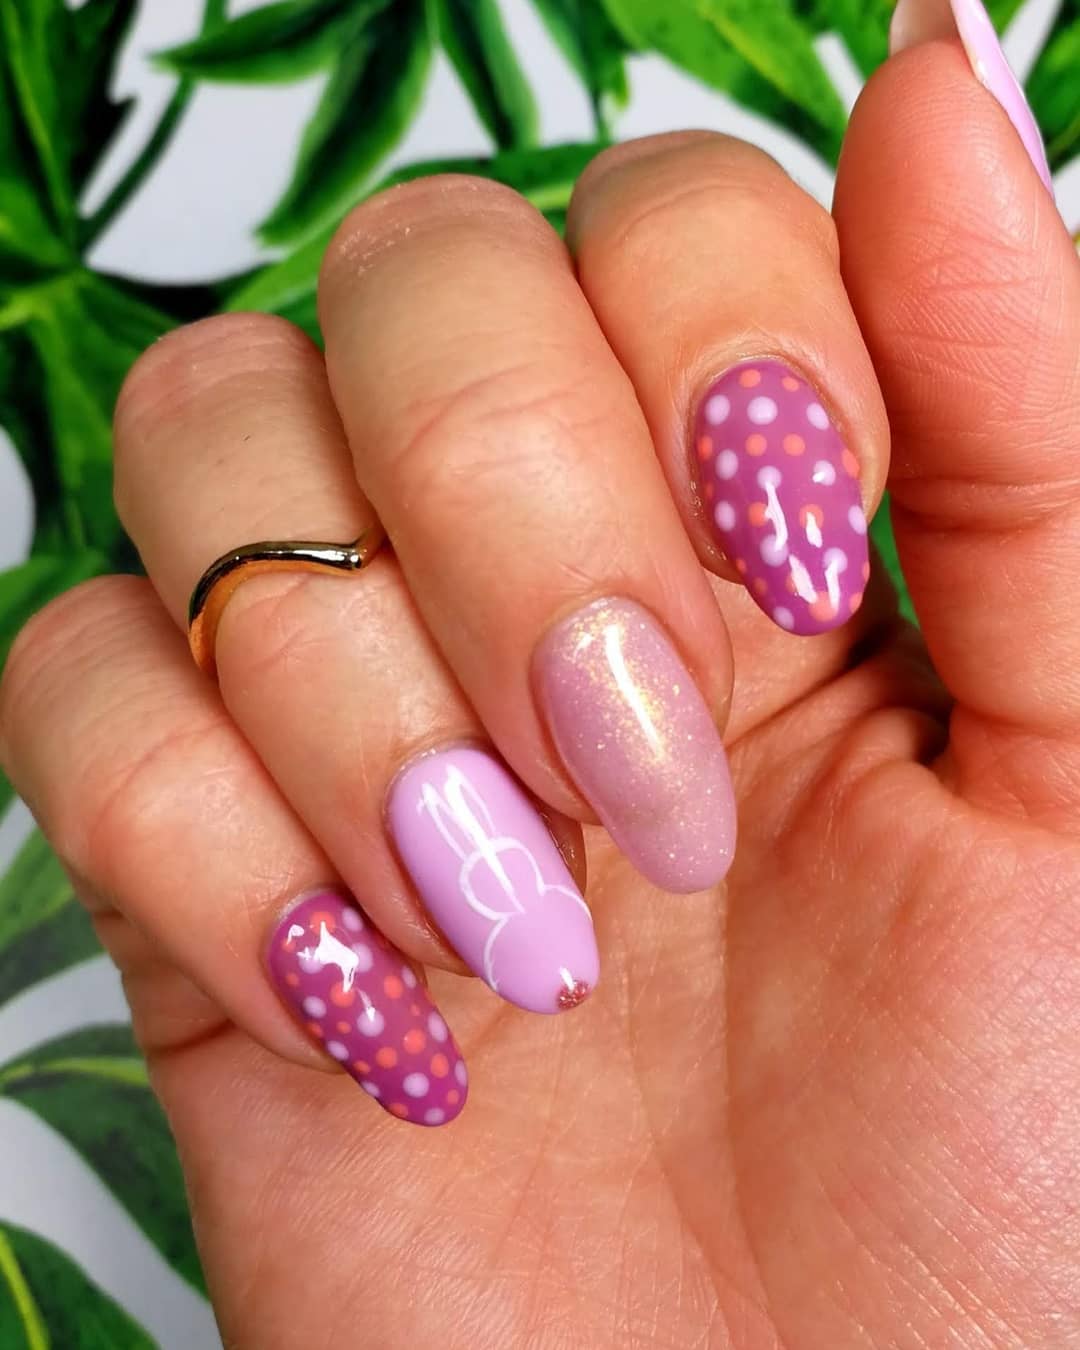 Polka Dotted Design Purple Nails with Words Painted